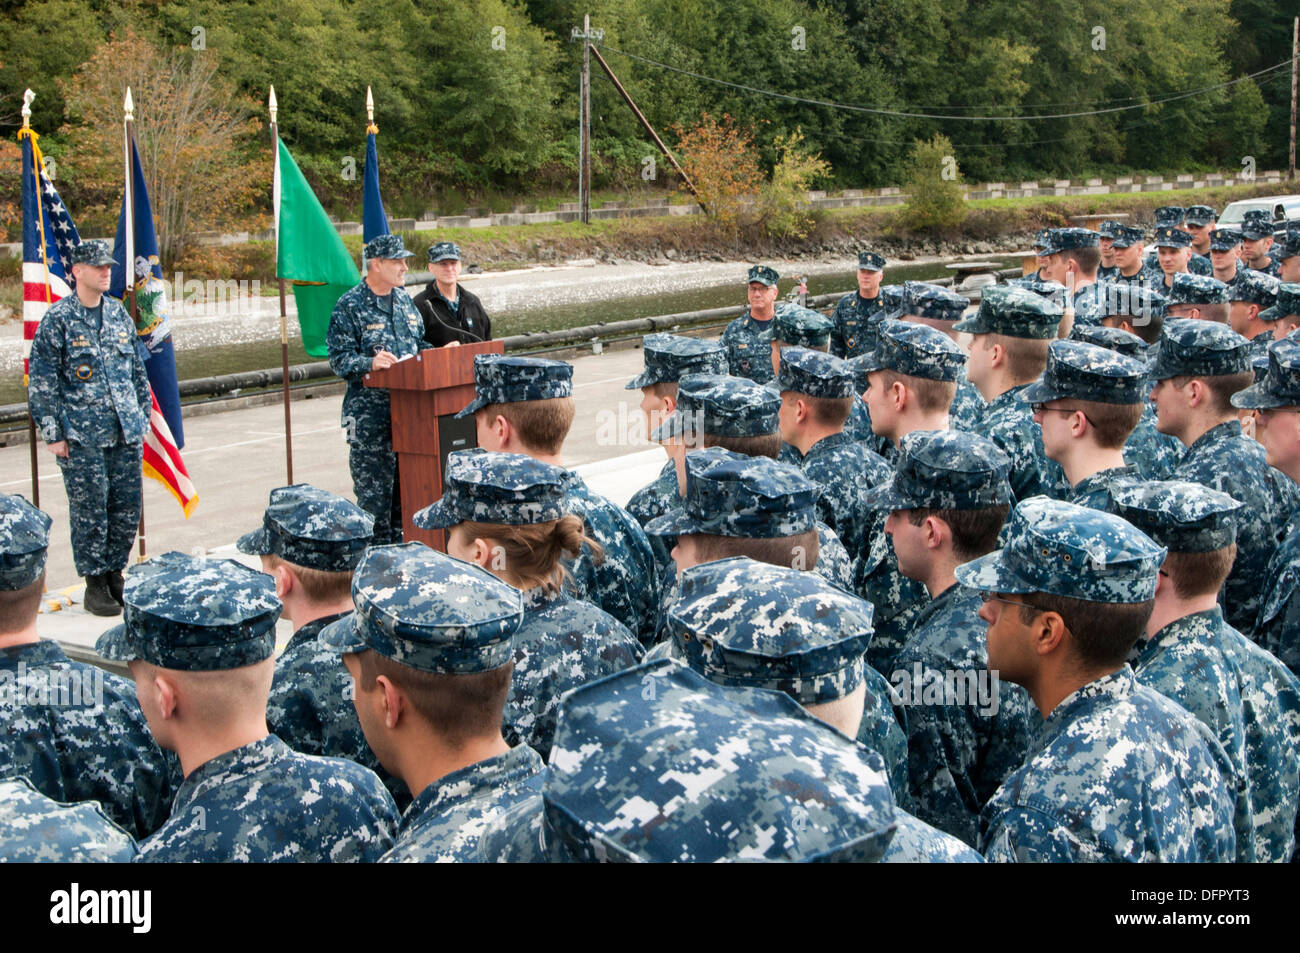 SILVERDALE, Wash. (Sept. 26, 2013) Rear Adm. Dietrich Kuhlmann, commander, Submarine Group 9, speaks to Sailors assigned to the Stock Photo